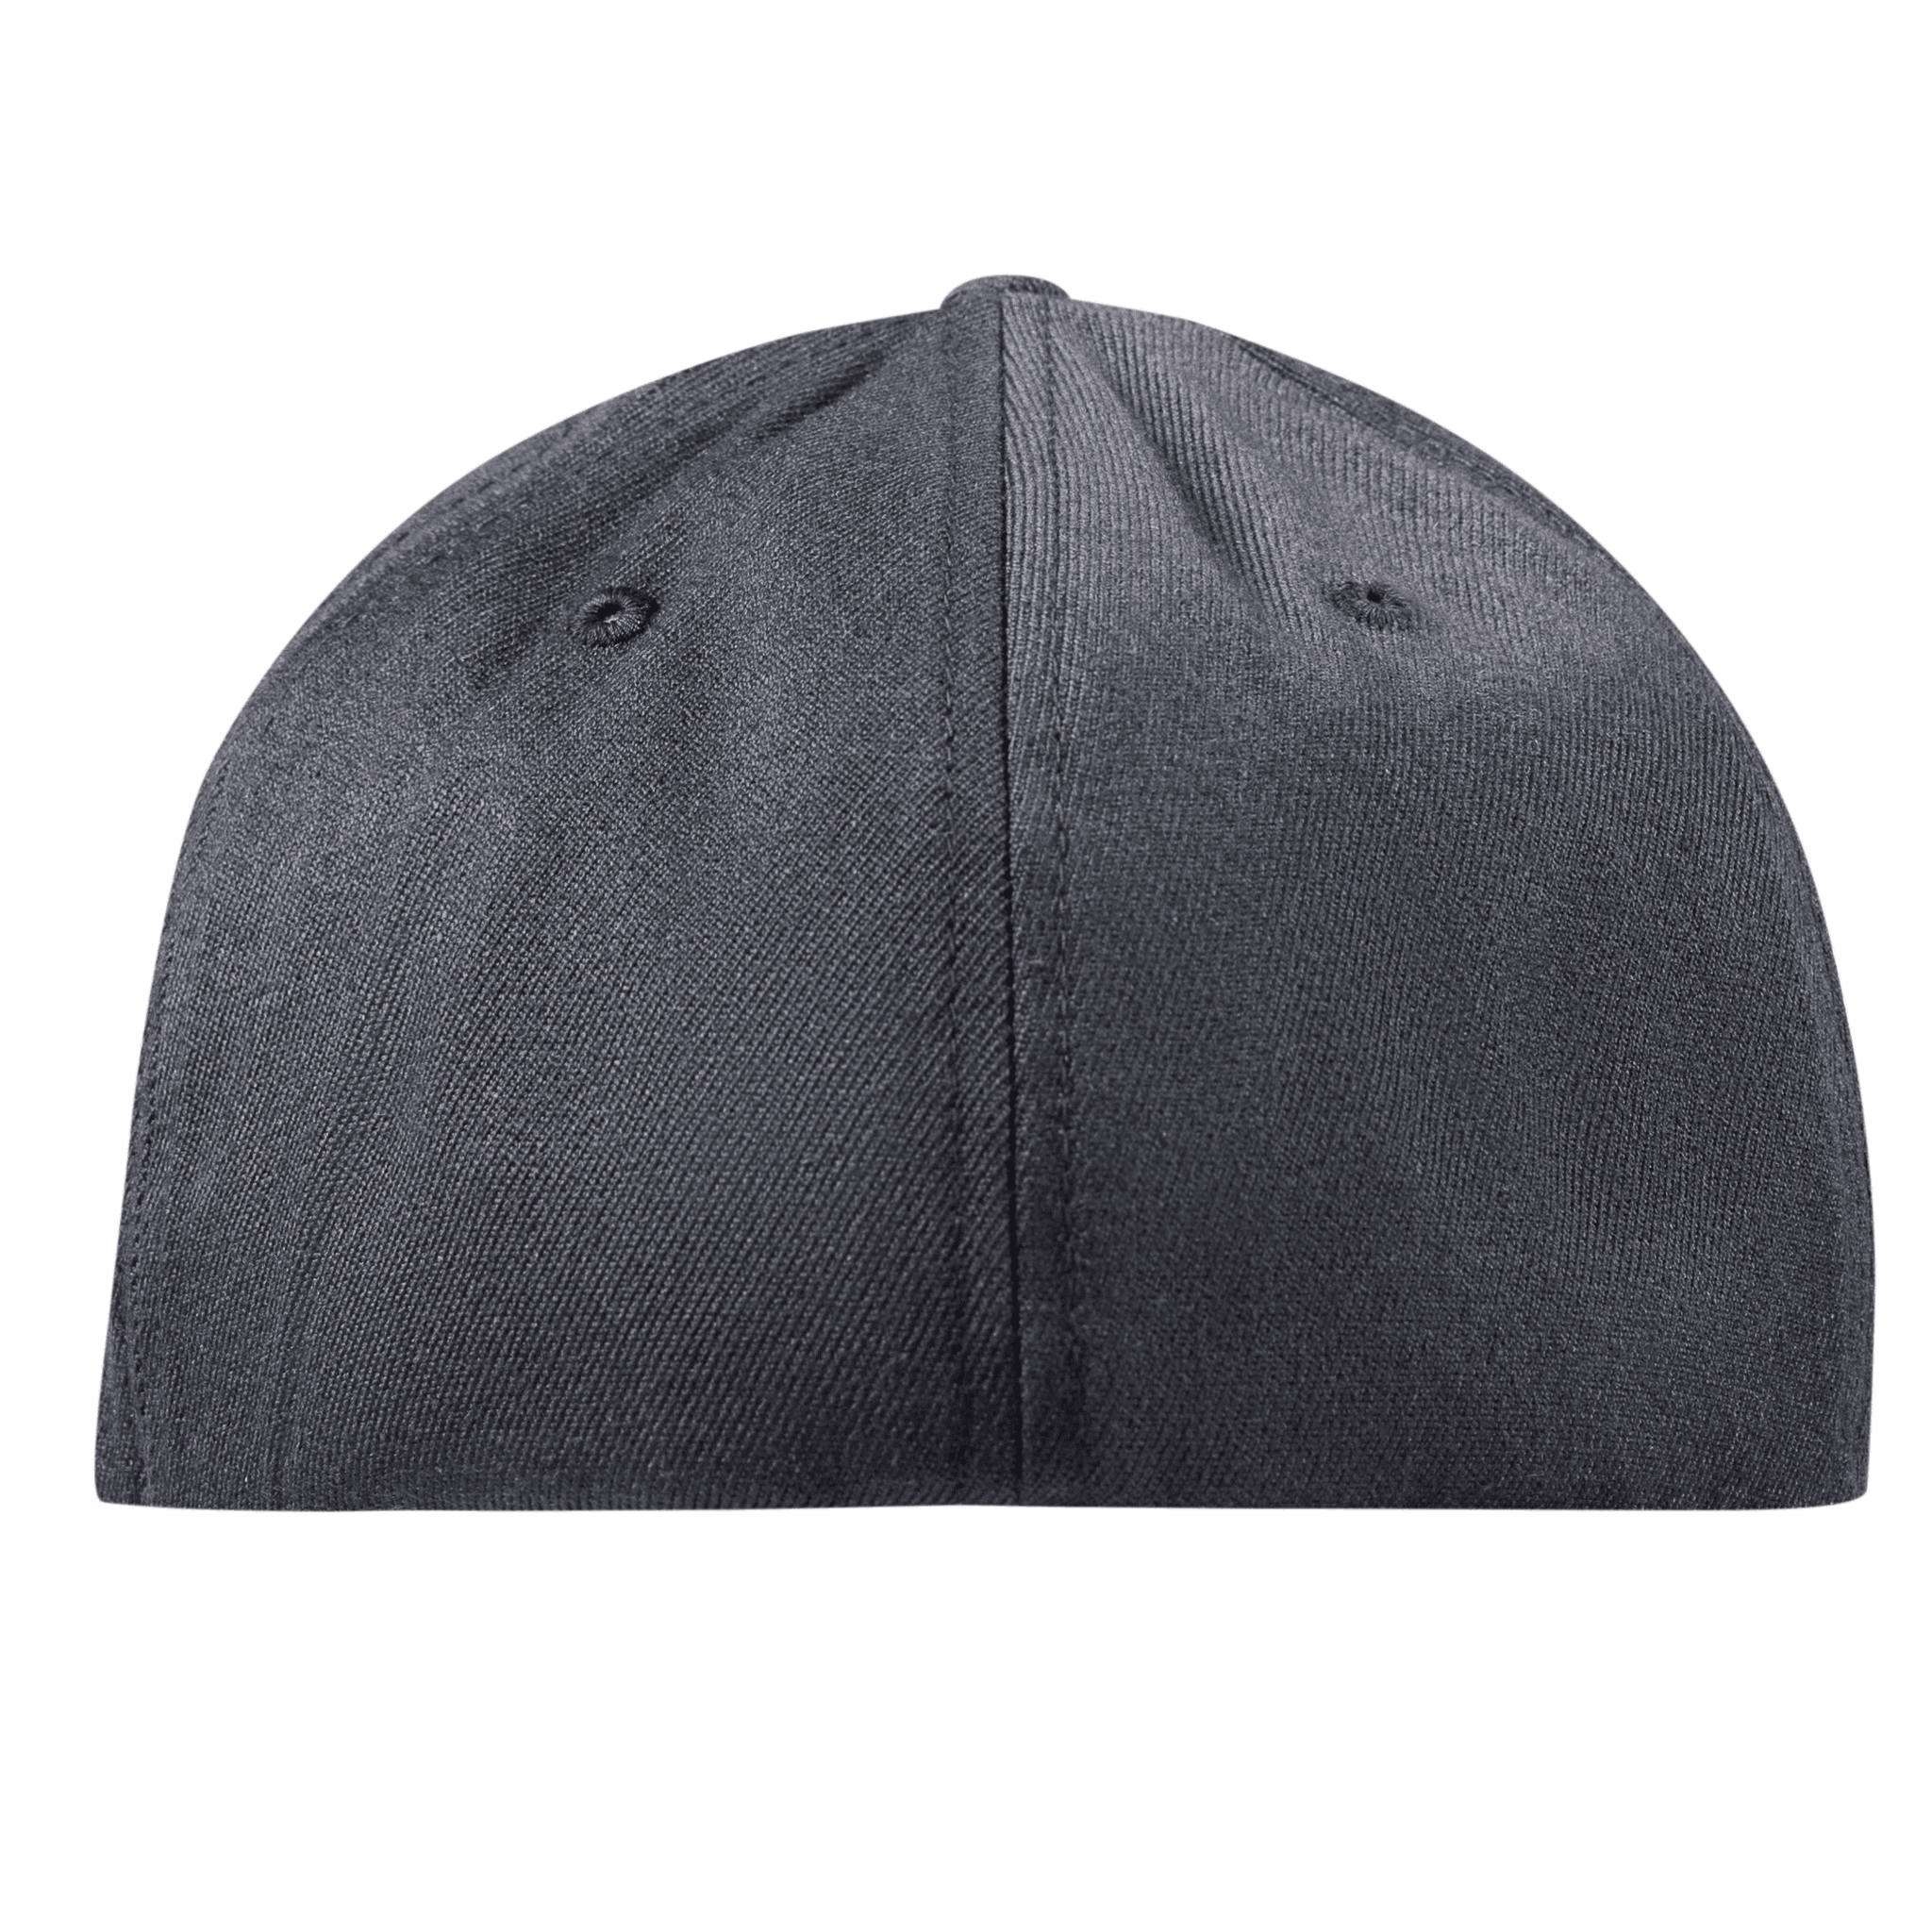 New Mexico Vintage Flexfit Fitted Back Charcoal